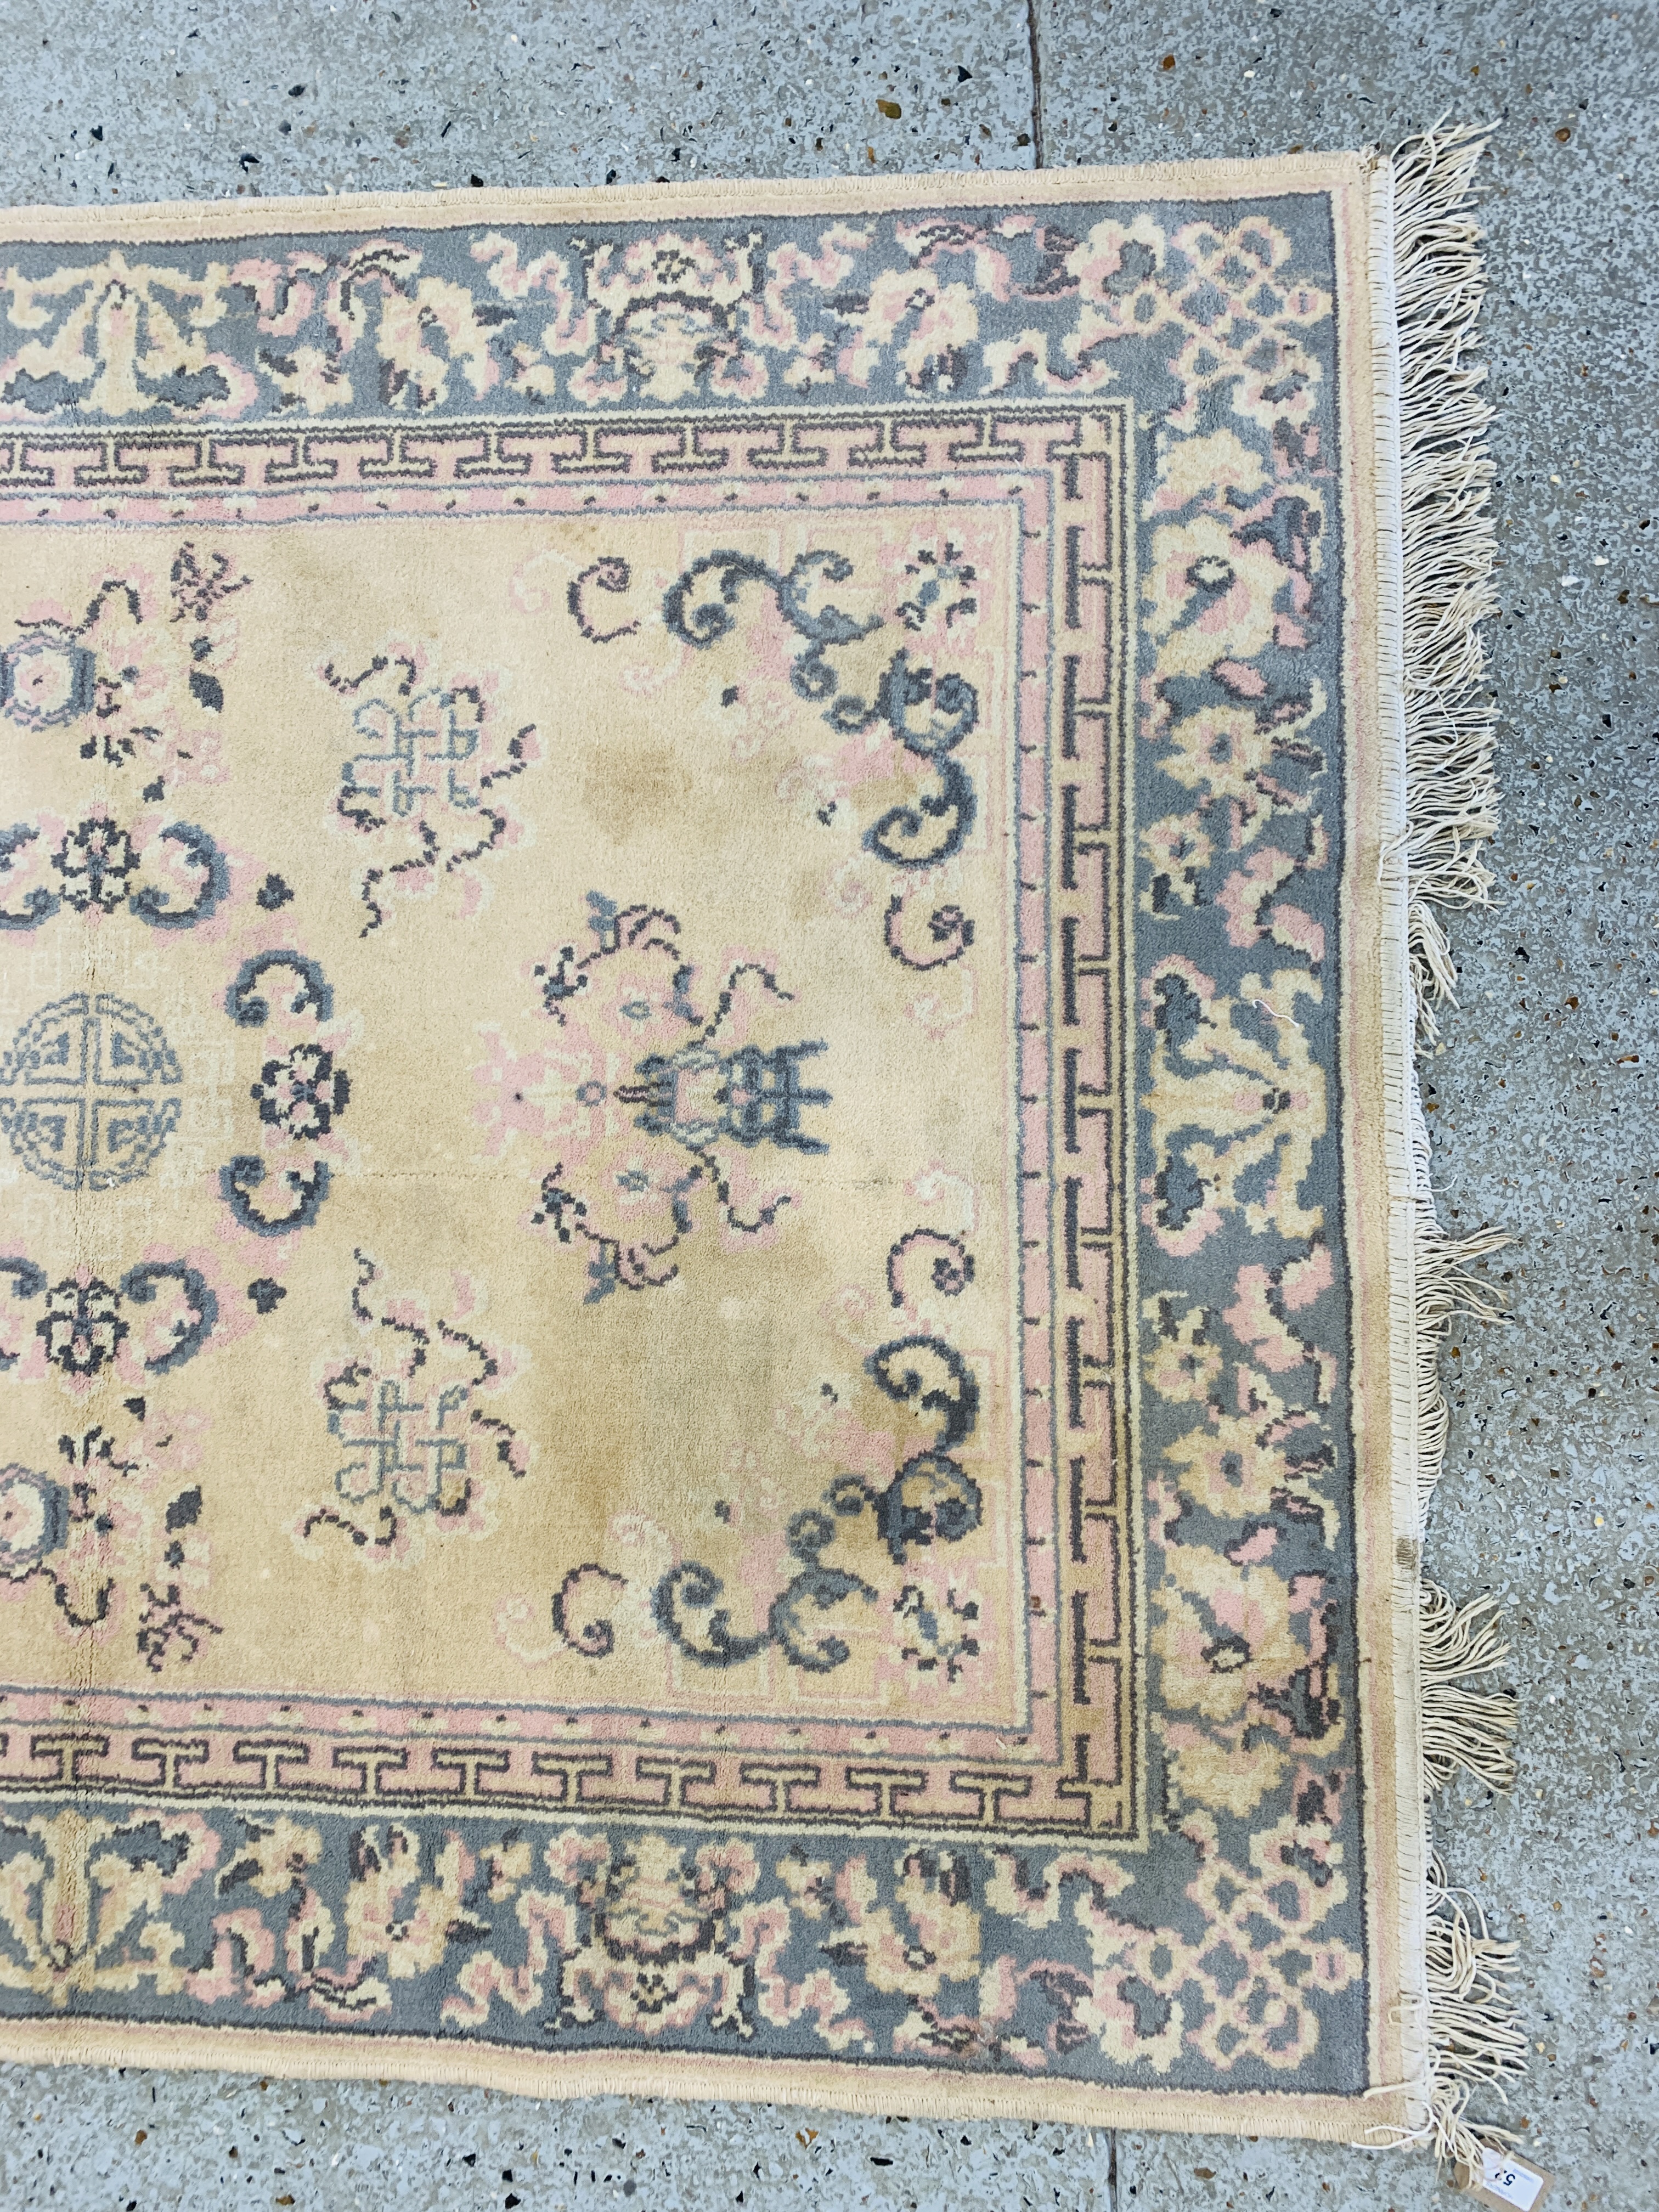 A CHINESE RUG BLUE / PINK PATTERNED ON BEIGE GROUND 1.7M X 1.25M. - Image 2 of 4